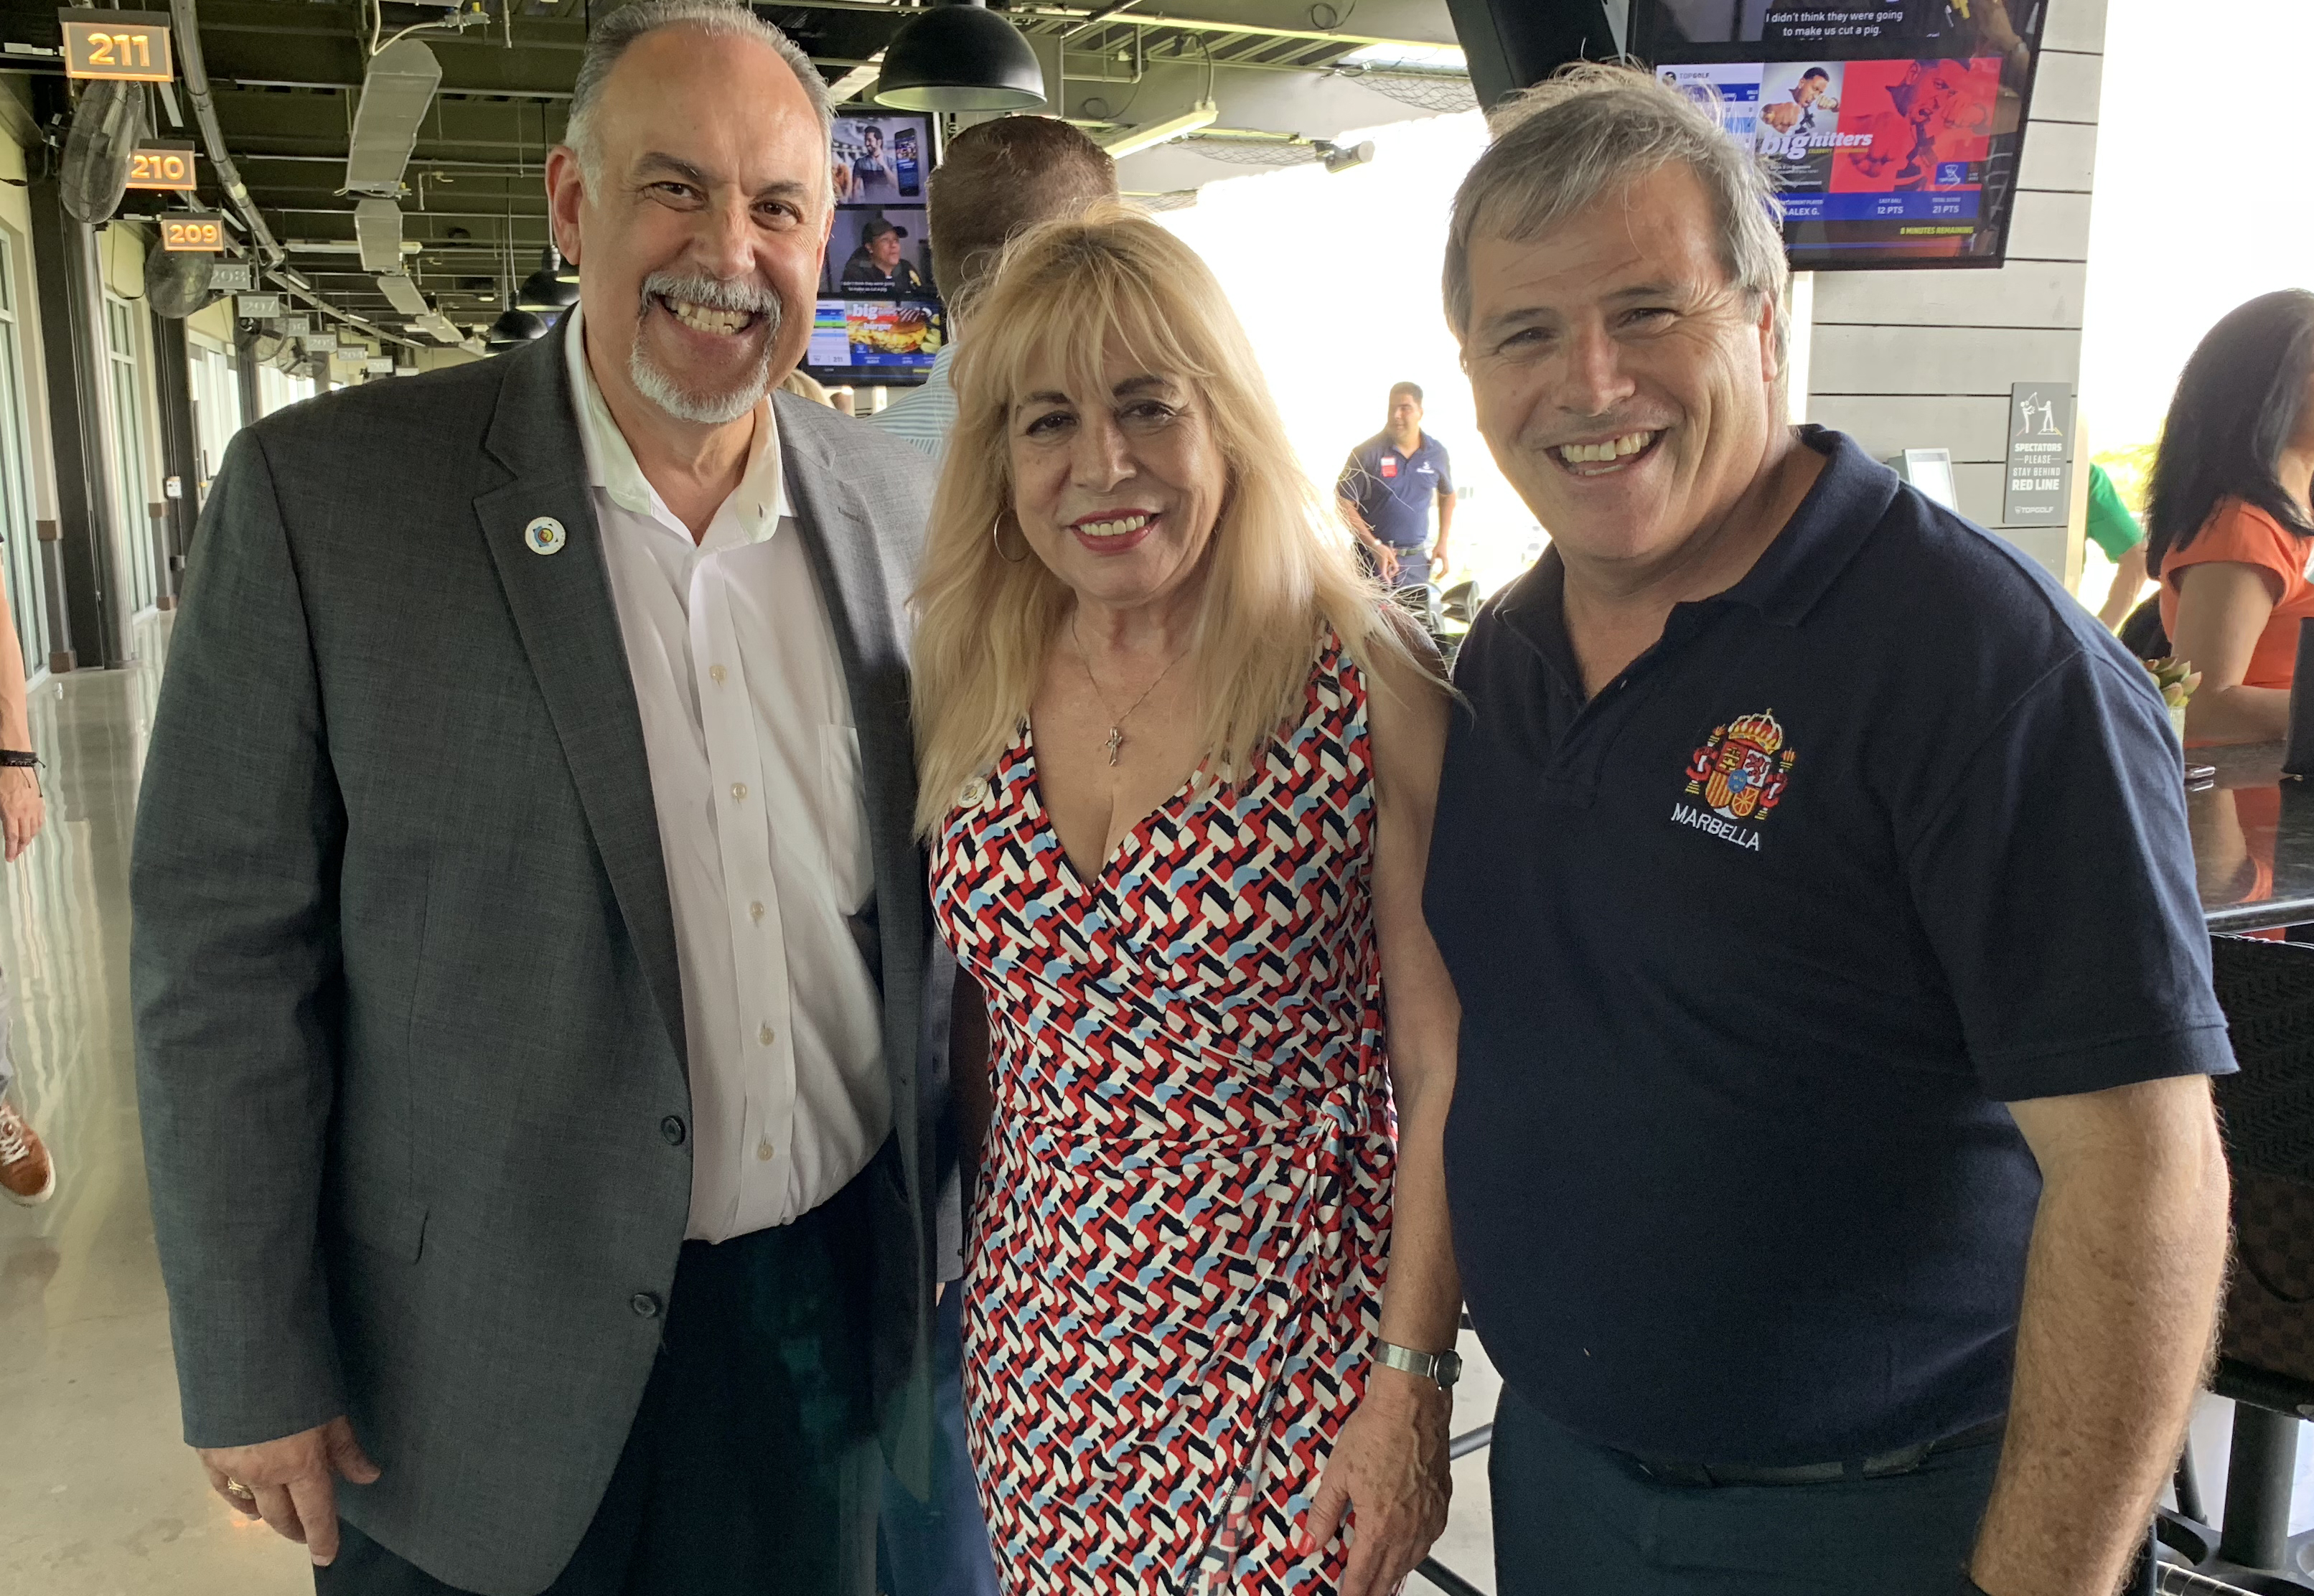 Doral Chamber of Commerce introduces Carmen Lopez taking a photo with two members at Topgolf Doral Networking Luncheon Event.